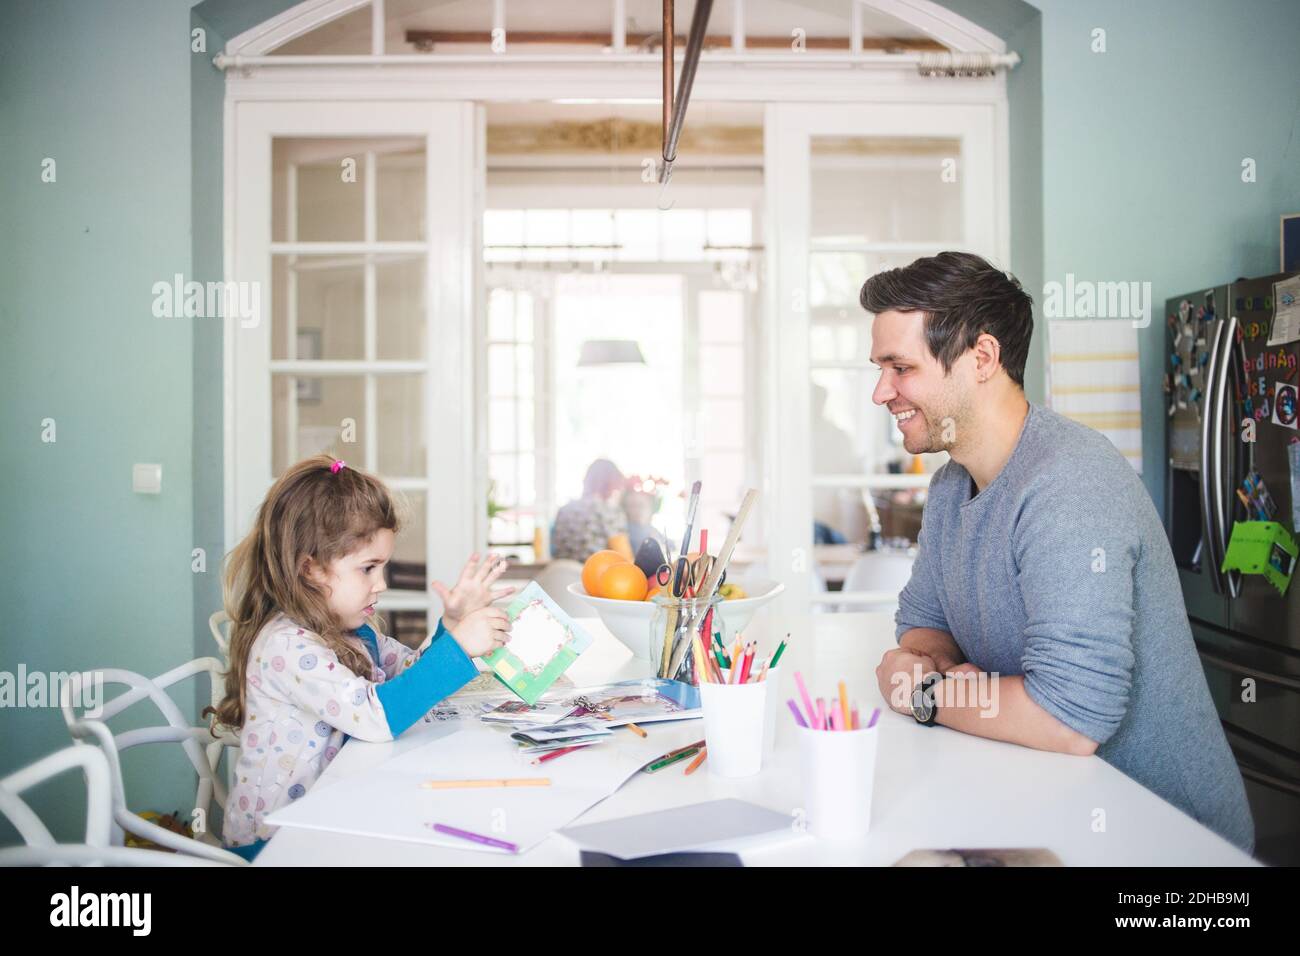 Smiling father looking at girl holding picture book in kitchen Stock Photo